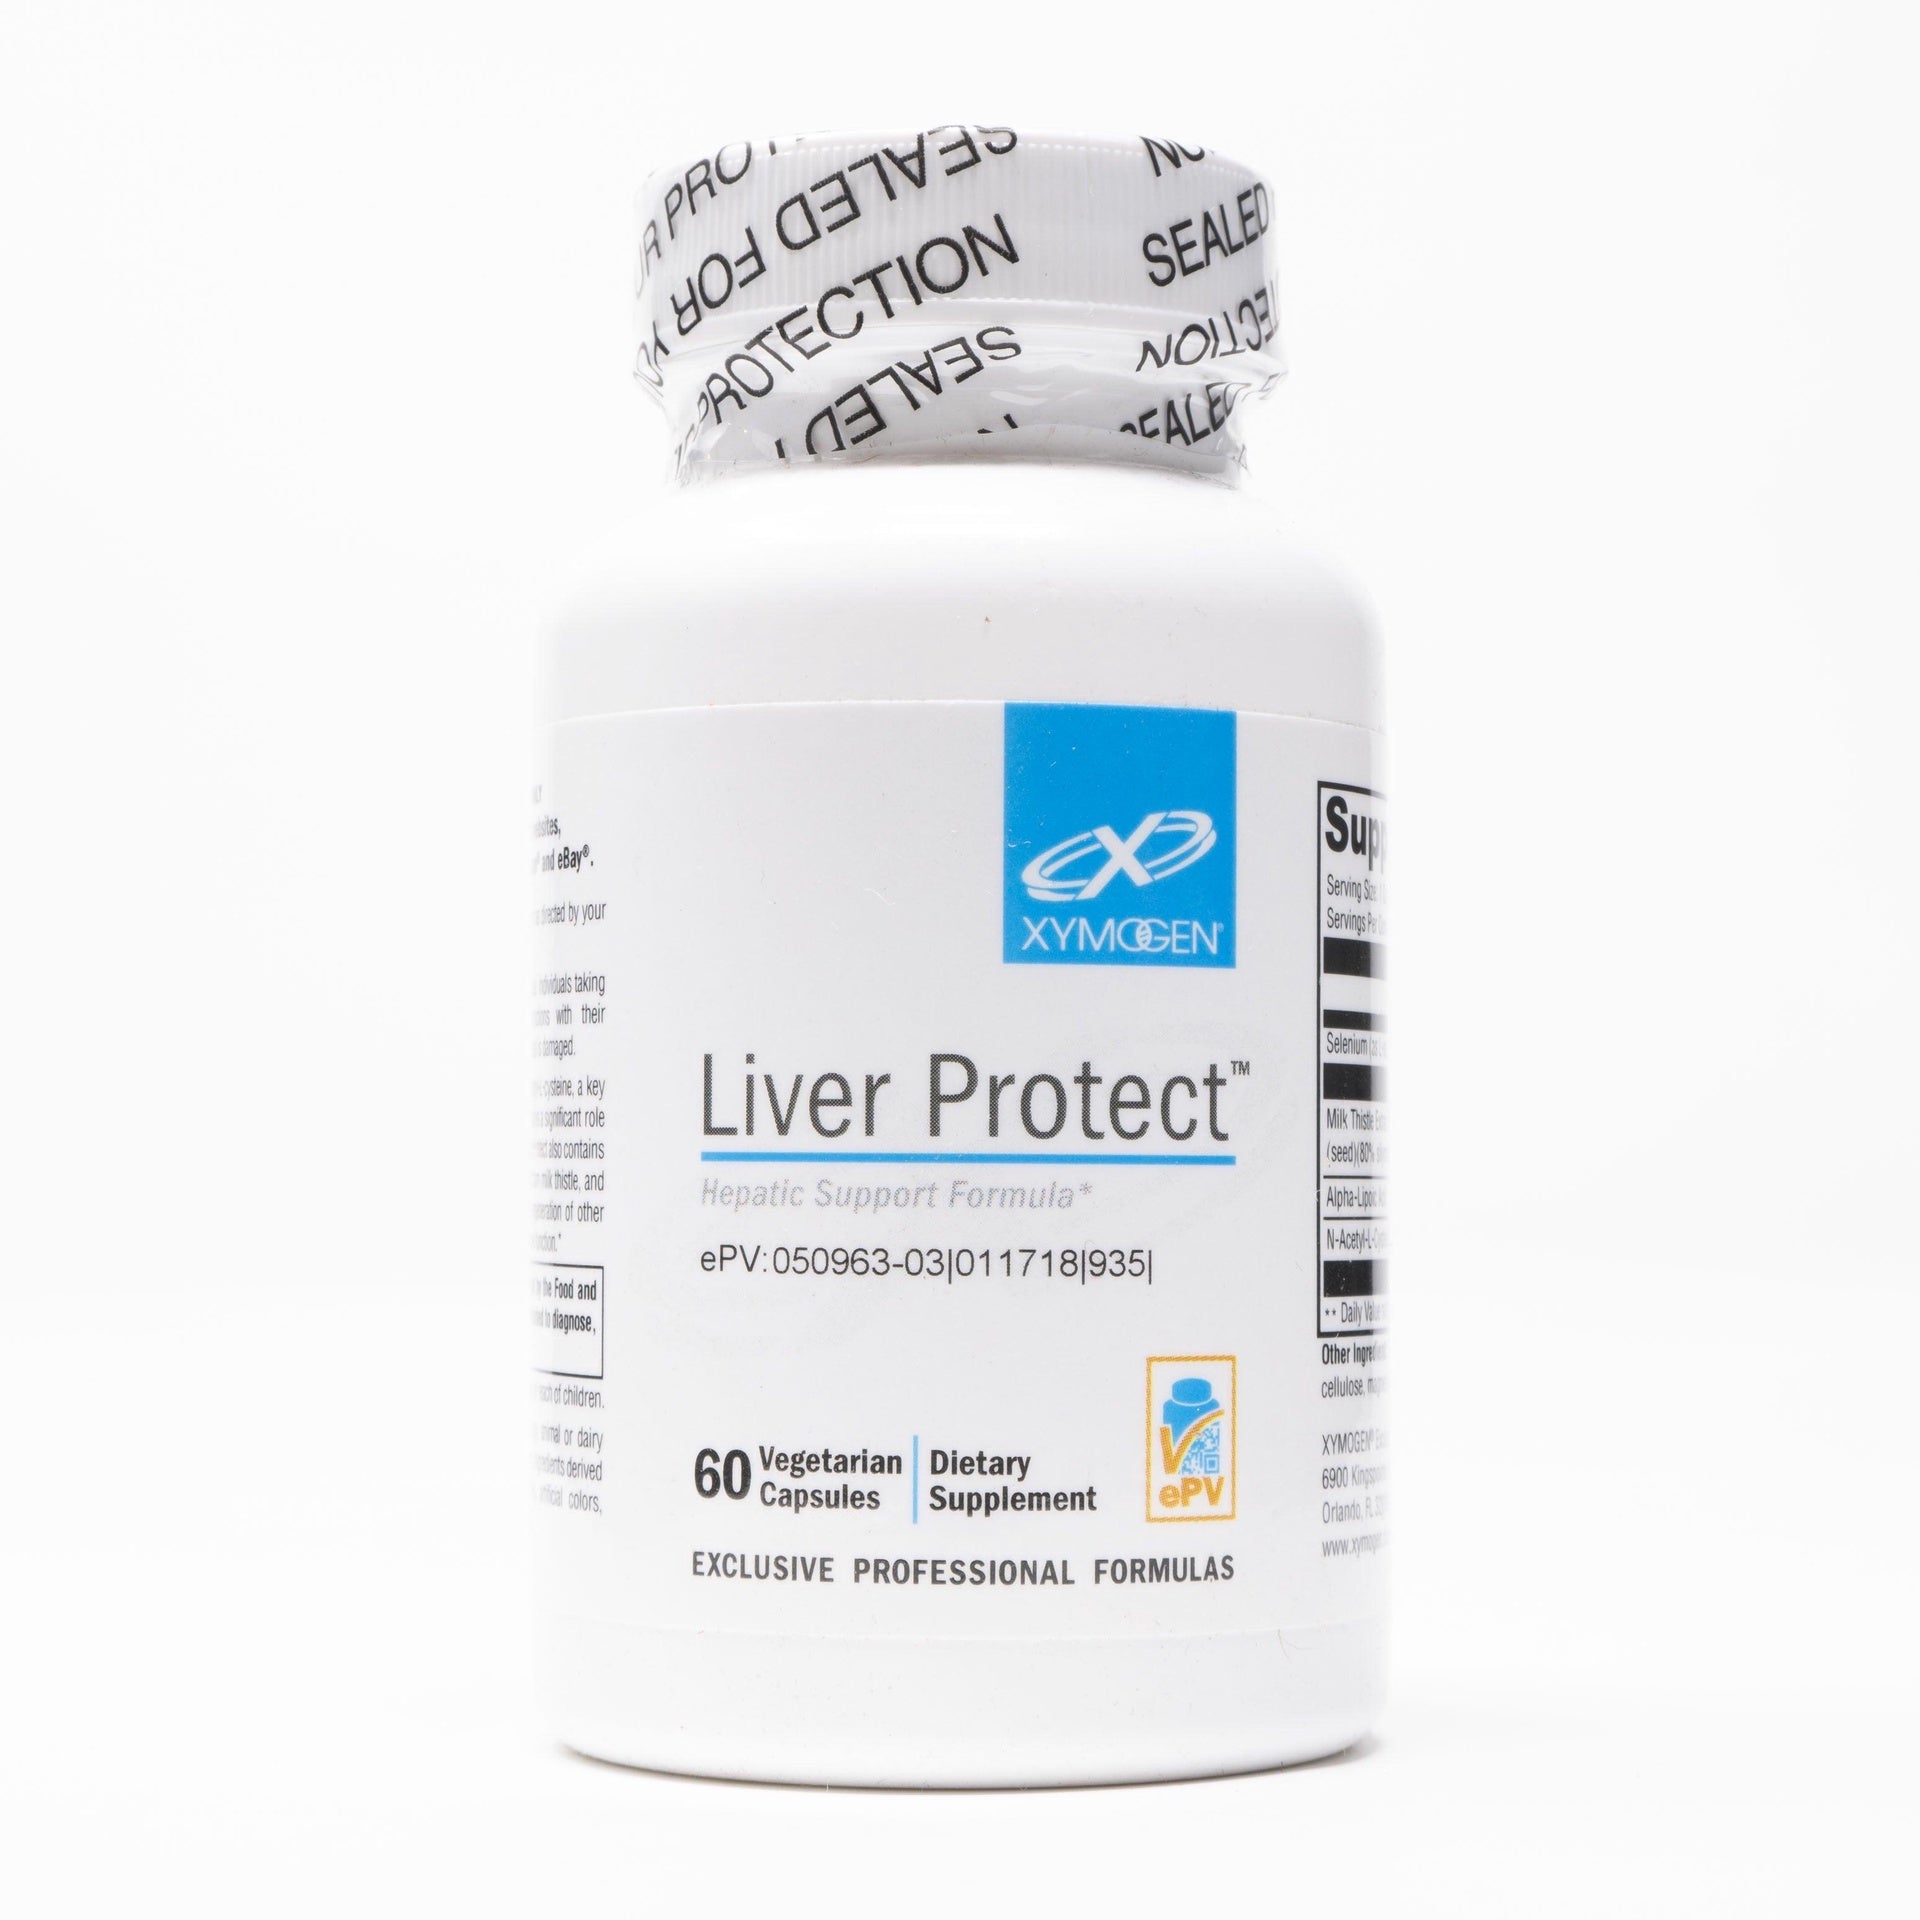 Liver Protect  60 Capsules.